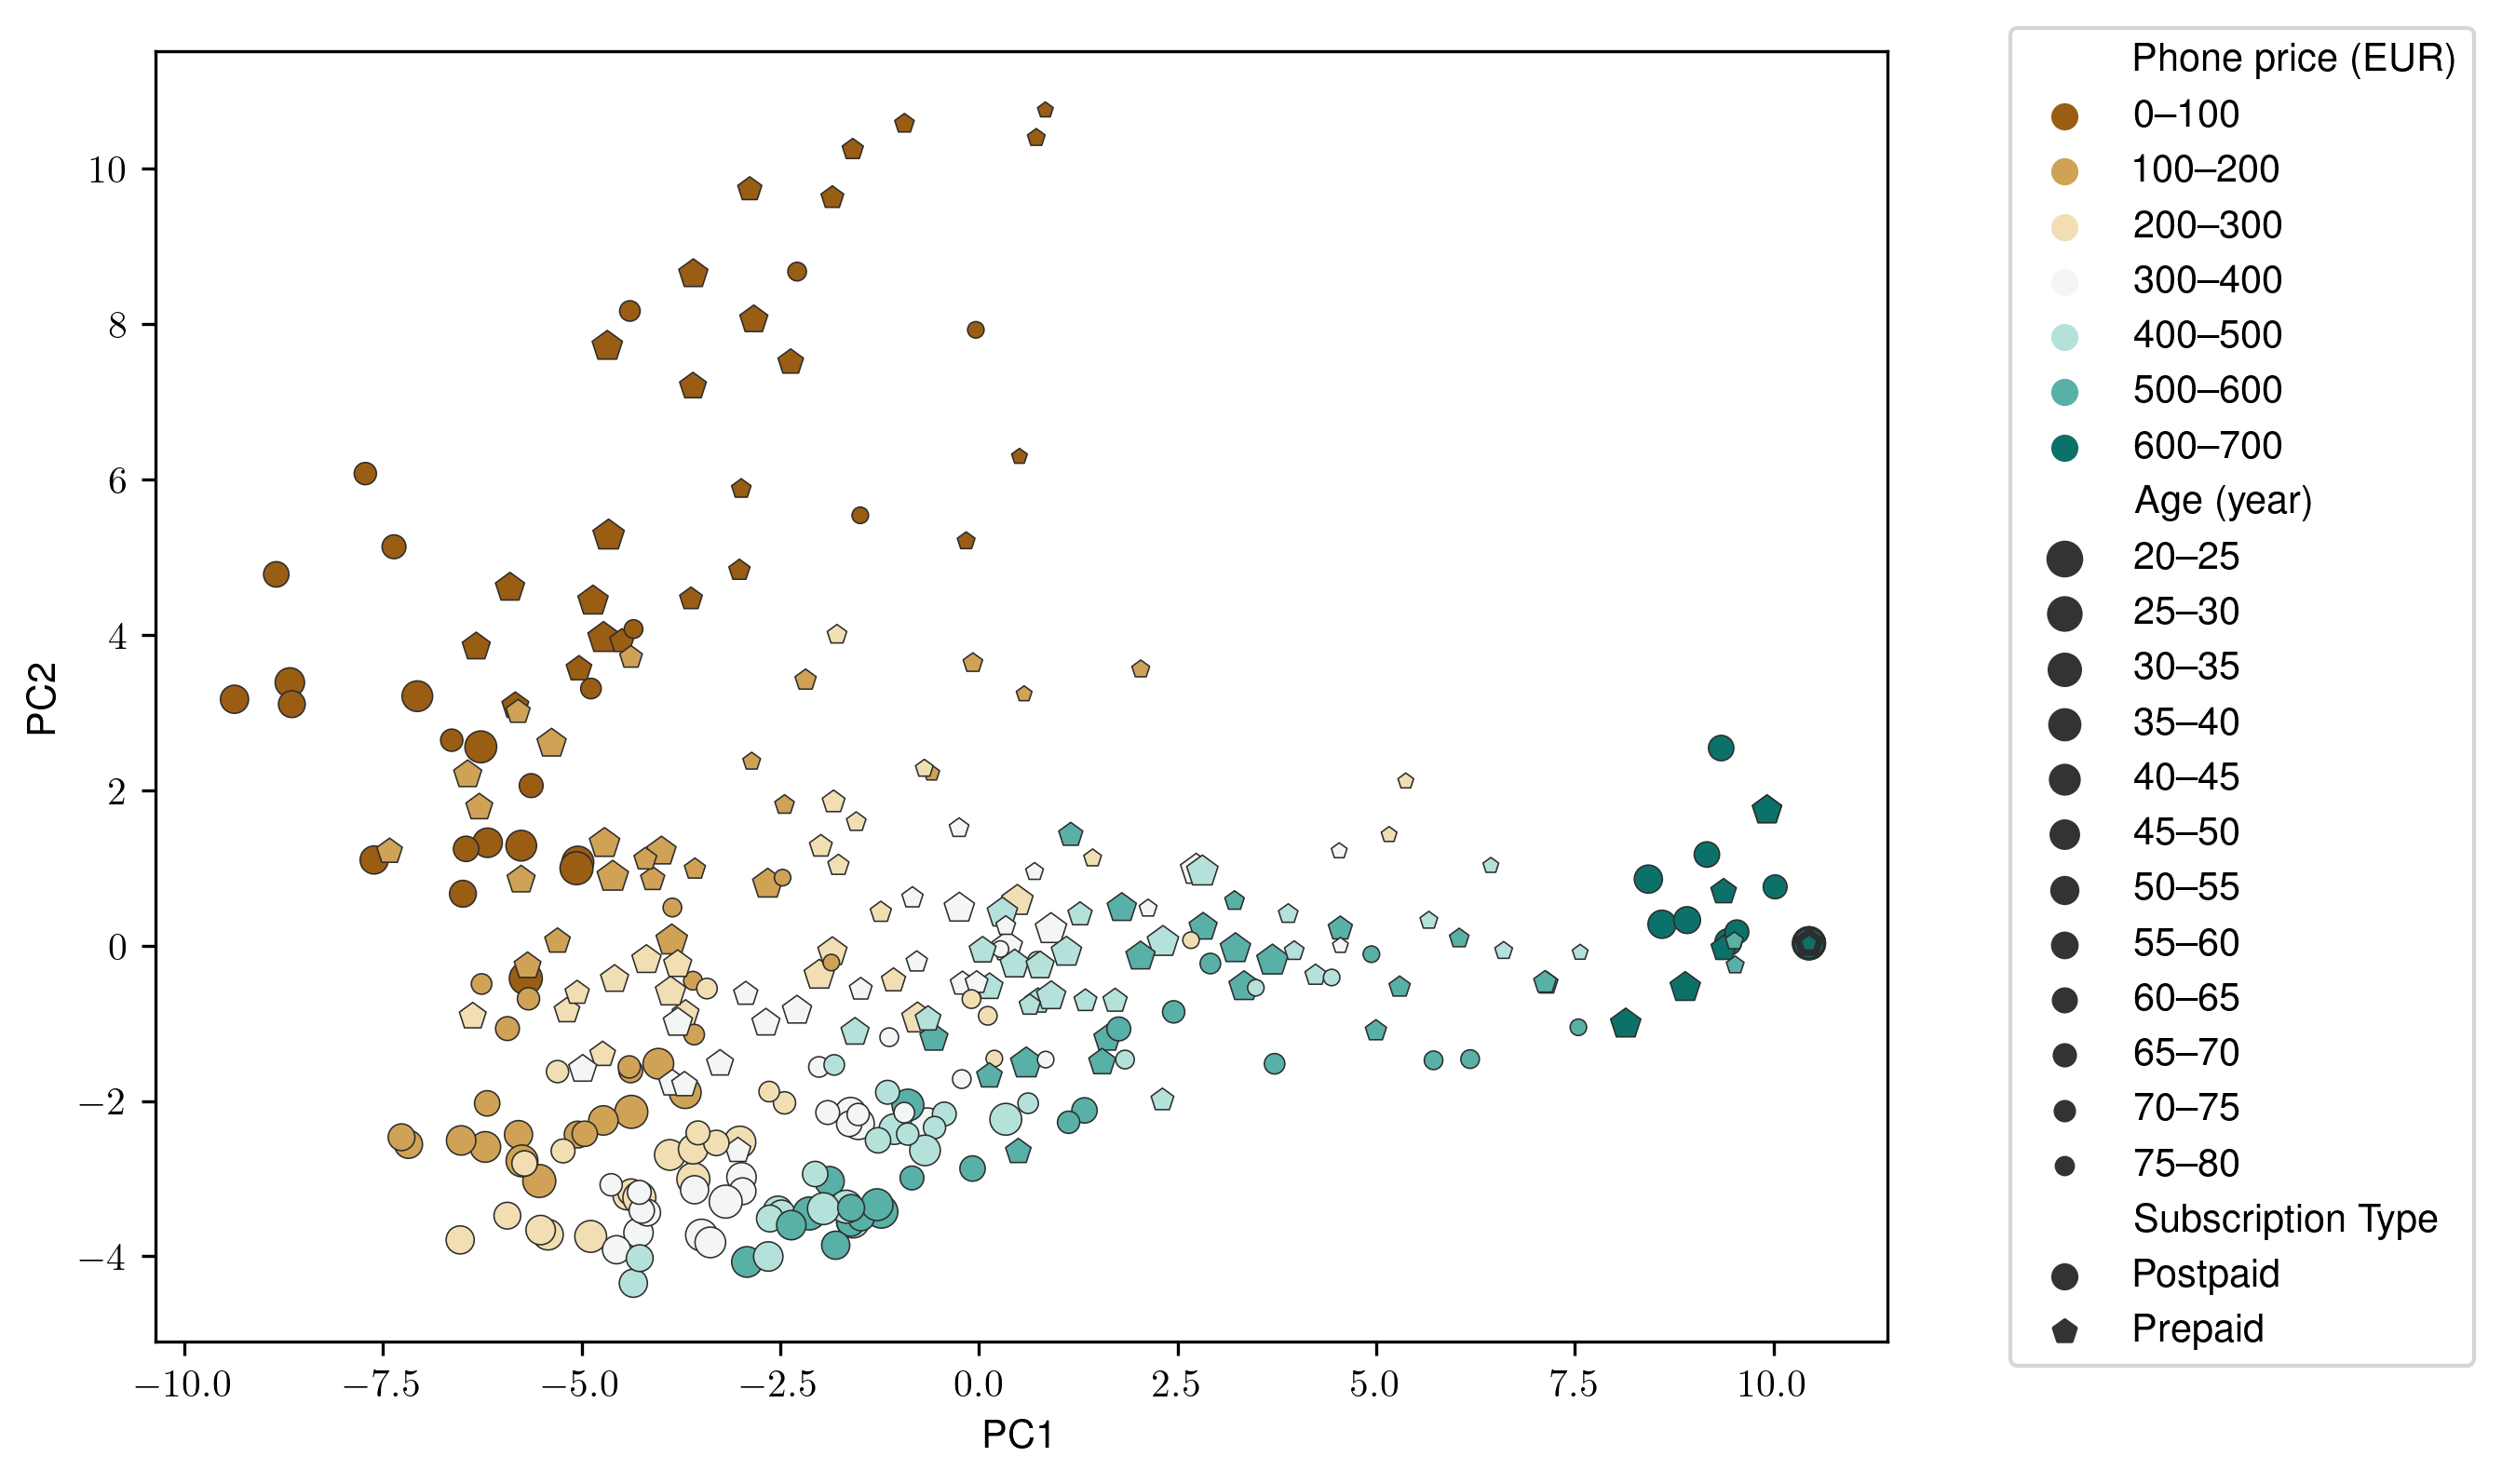 Scatter plot of the 2-component Principal Component Analysis. Marker sizes indicate subscriber age category, the color represents the phone price category and the subscription type (Prepaid/Postpaid) is distinguished by the marker type.